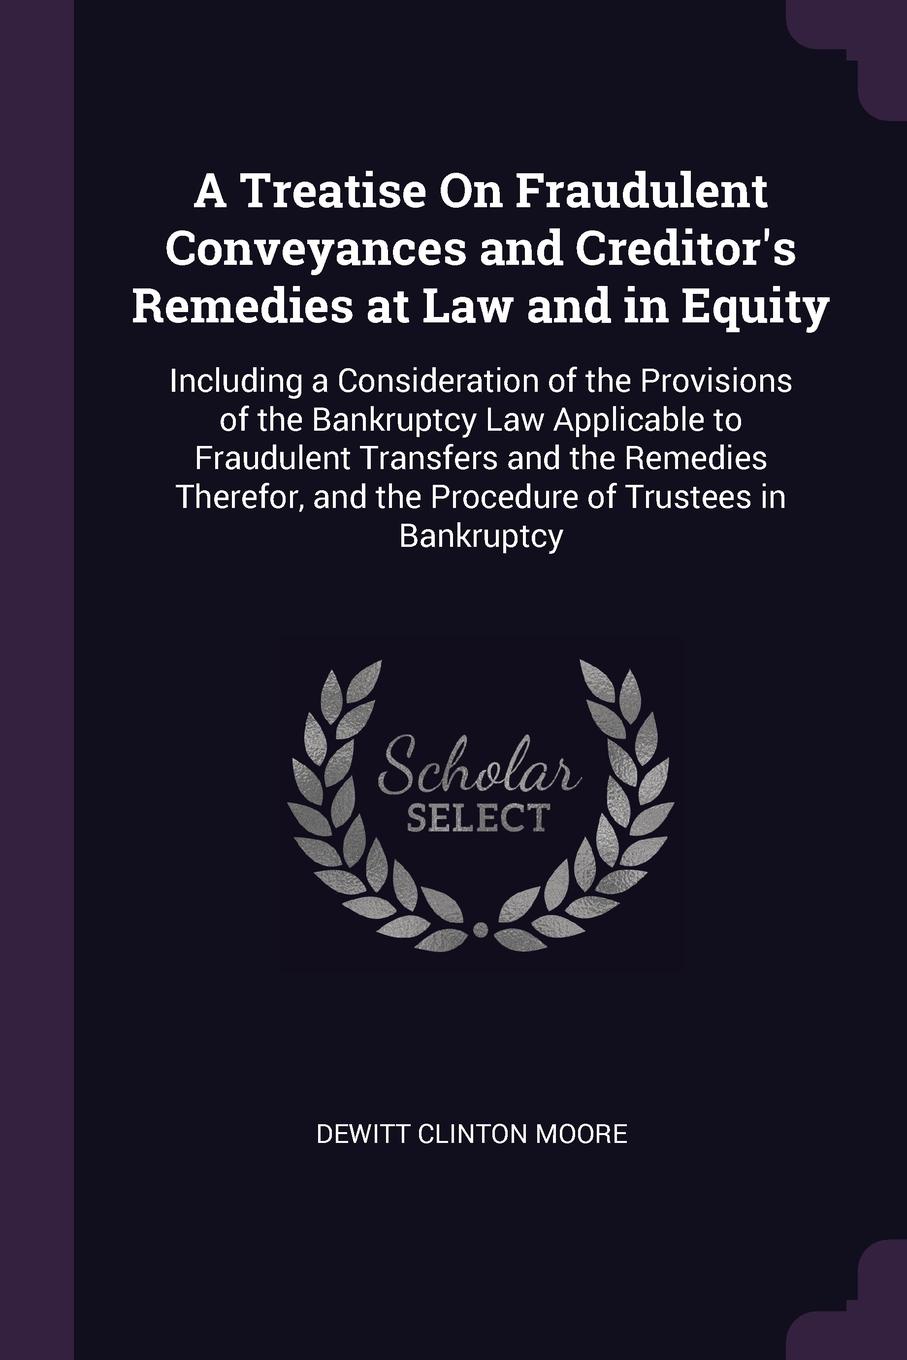 A Treatise On Fraudulent Conveyances and Creditor`s Remedies at Law and in Equity. Including a Consideration of the Provisions of the Bankruptcy Law Applicable to Fraudulent Transfers and the Remedies Therefor, and the Procedure of Trustees in Ban...